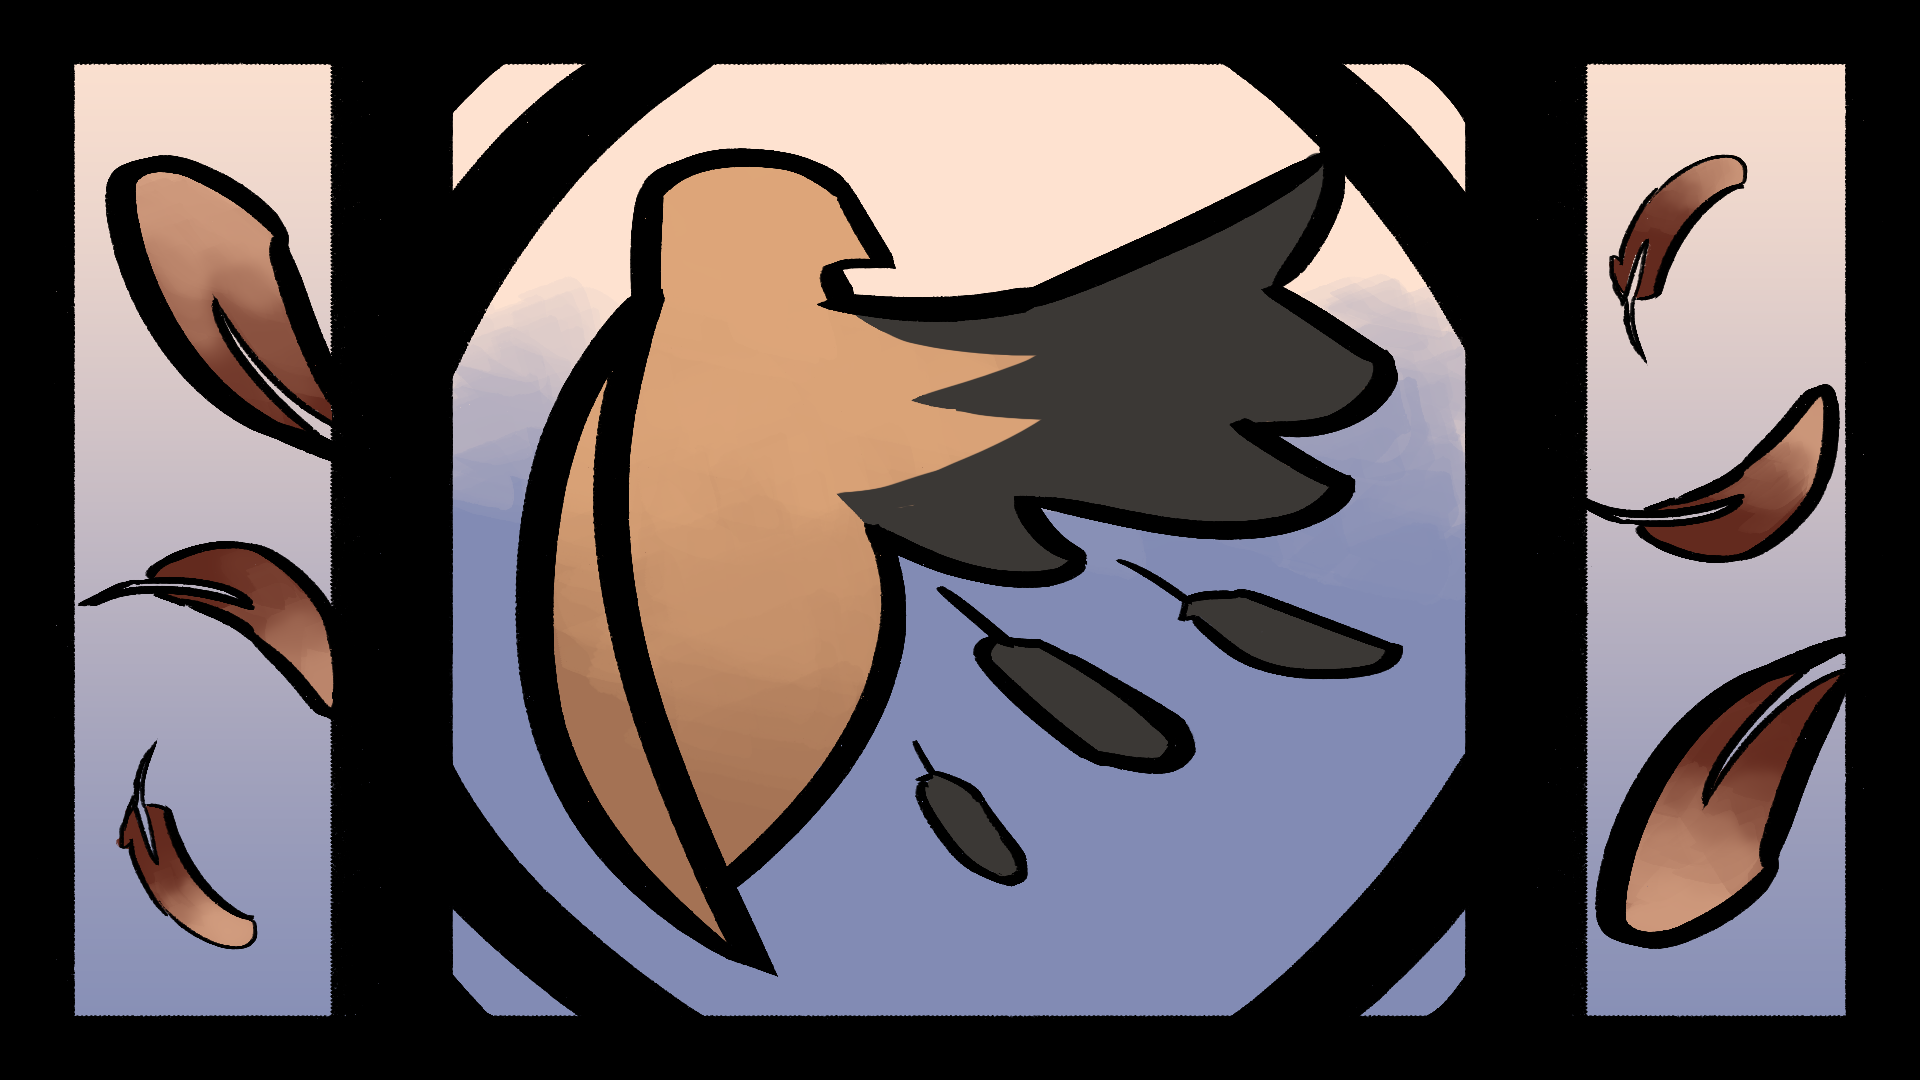 Icon for Birds of a Feather